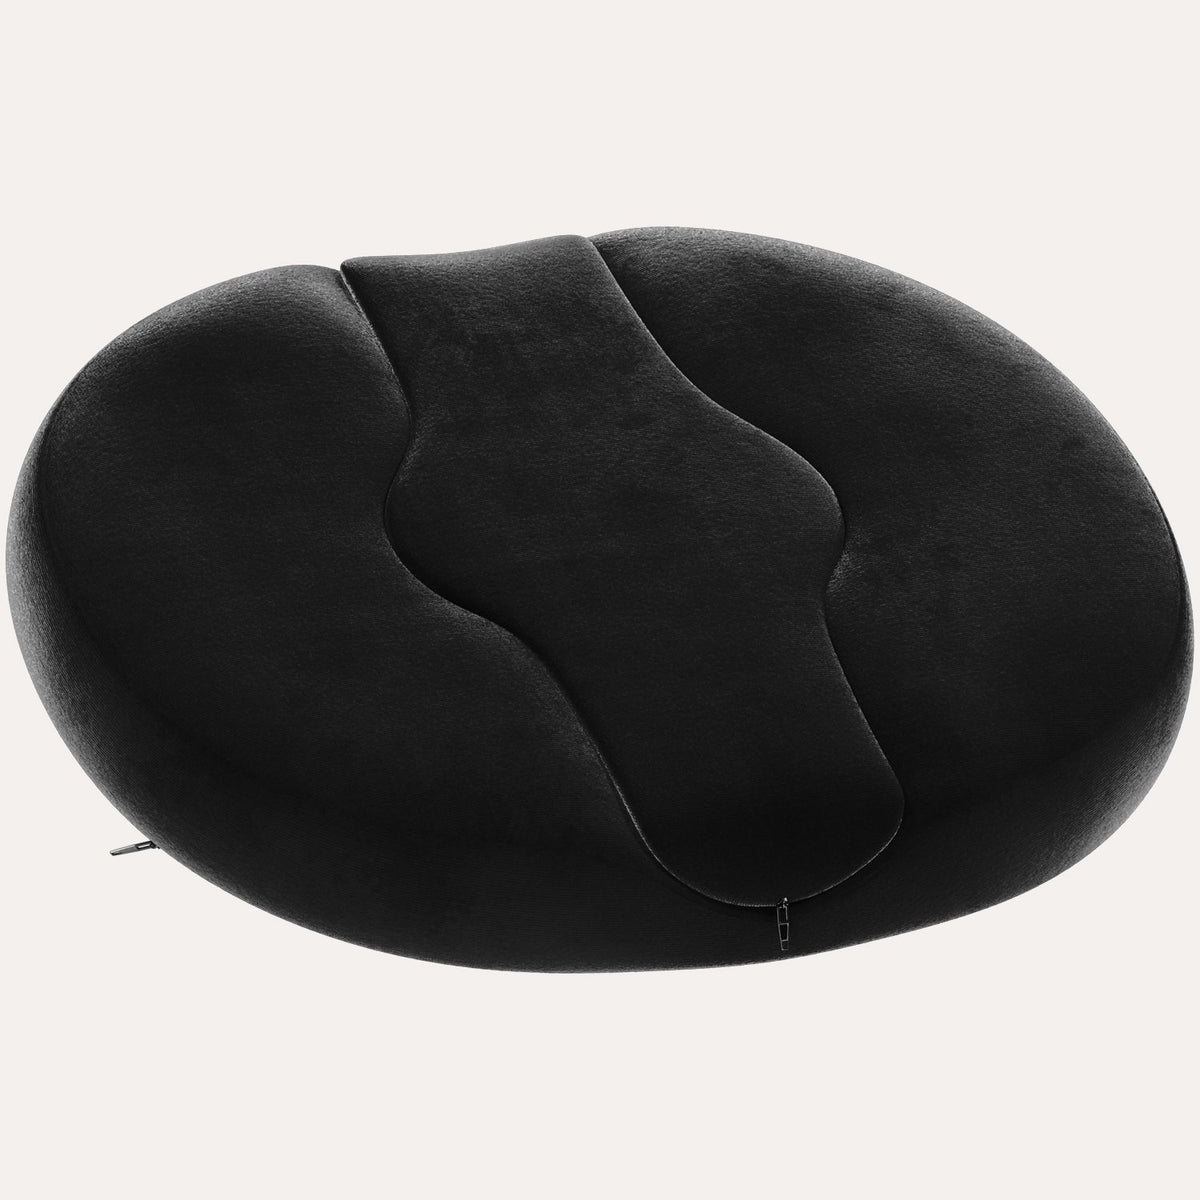 AweStuffs Multicolor Donut Shaped Pillow, For Comfort, Shape